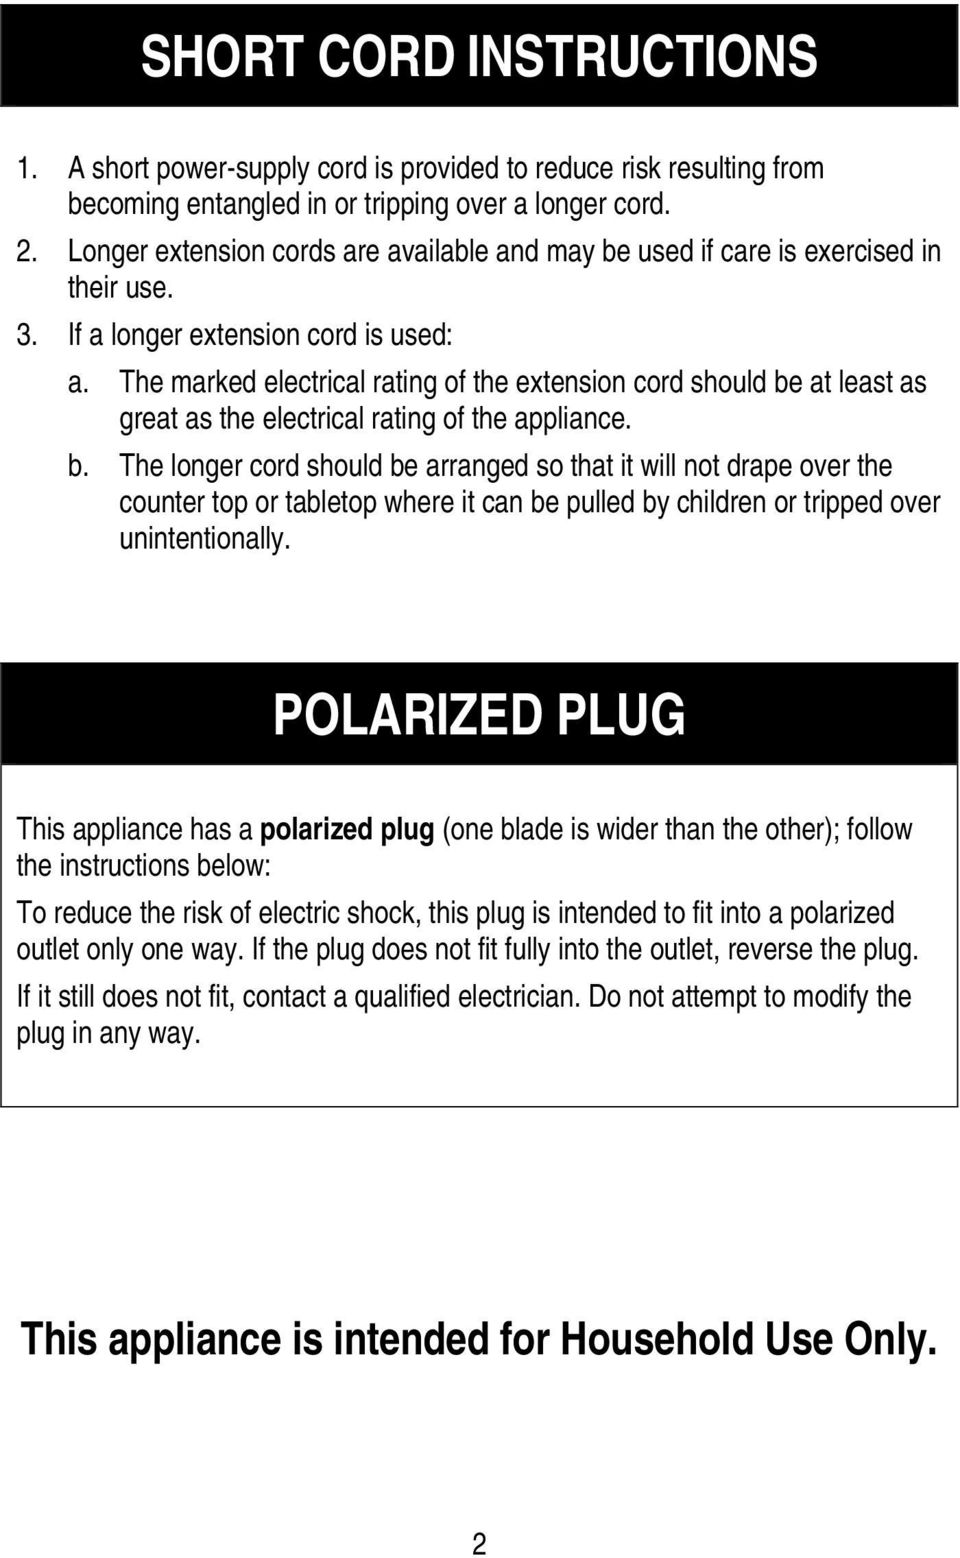 The marked electrical rating of the extension cord should be